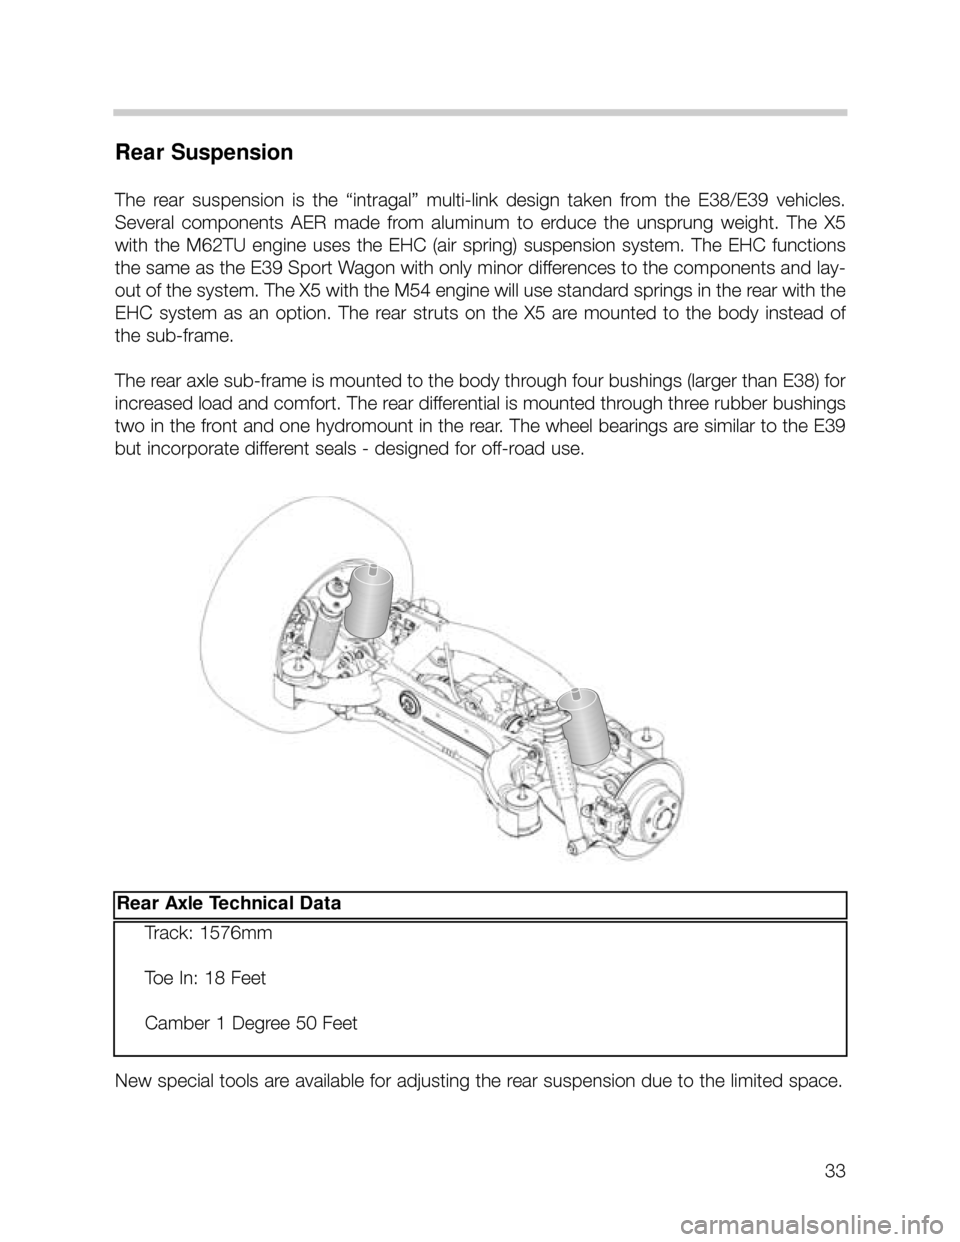 BMW X5 2000 E53 Workshop Manual 33
Rear Suspension
The  rear  suspension  is  the  “intragal”  multi-link  design  taken  from  the  E38/E39  vehicles.
Several  components  AER  made  from  aluminum  to  erduce  the  unsprung  w